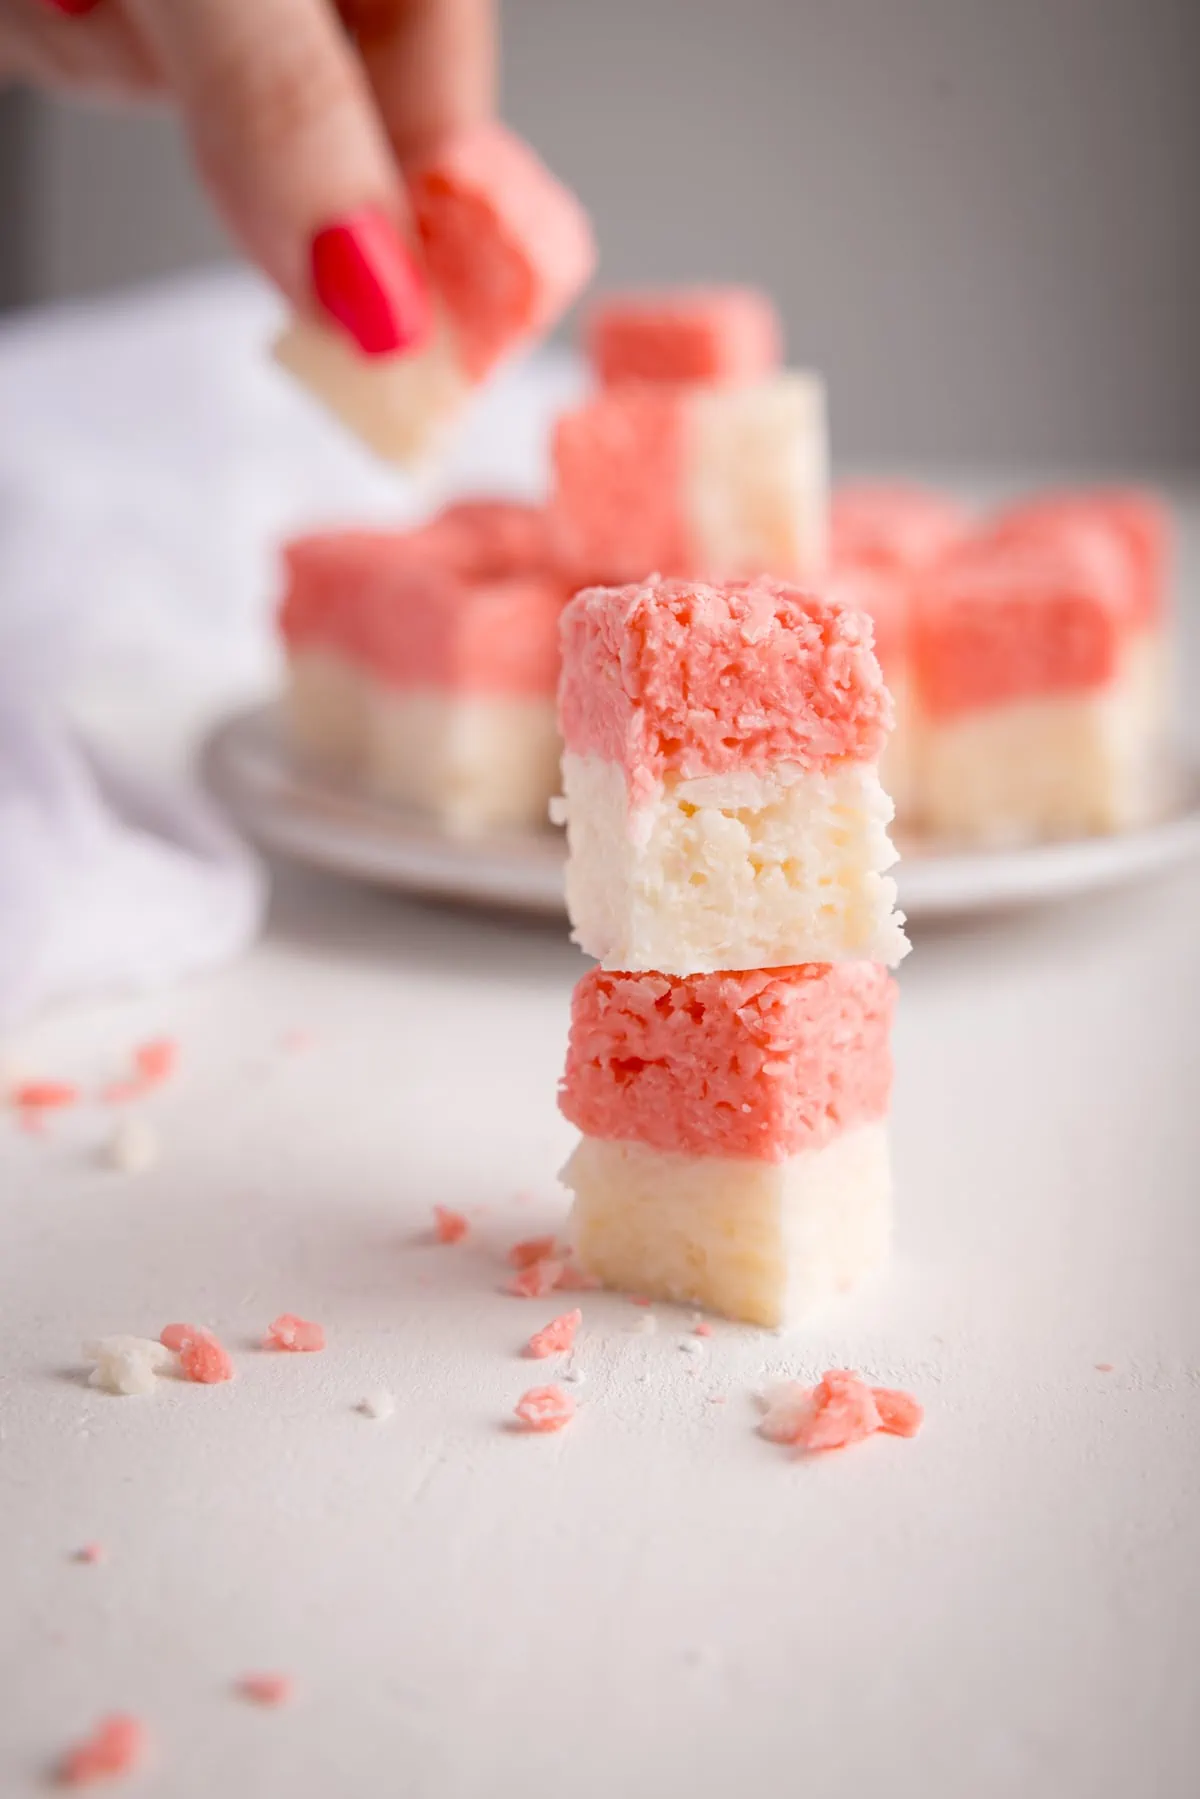 Two cubes of pink and white coconut ice stacked on top of each other on a white surface. There is more coconut ice in the background on a white plate, alongside a white napkin. One of the pieces of coconut ice in the background is being taking by a hand with pink-painted nails.